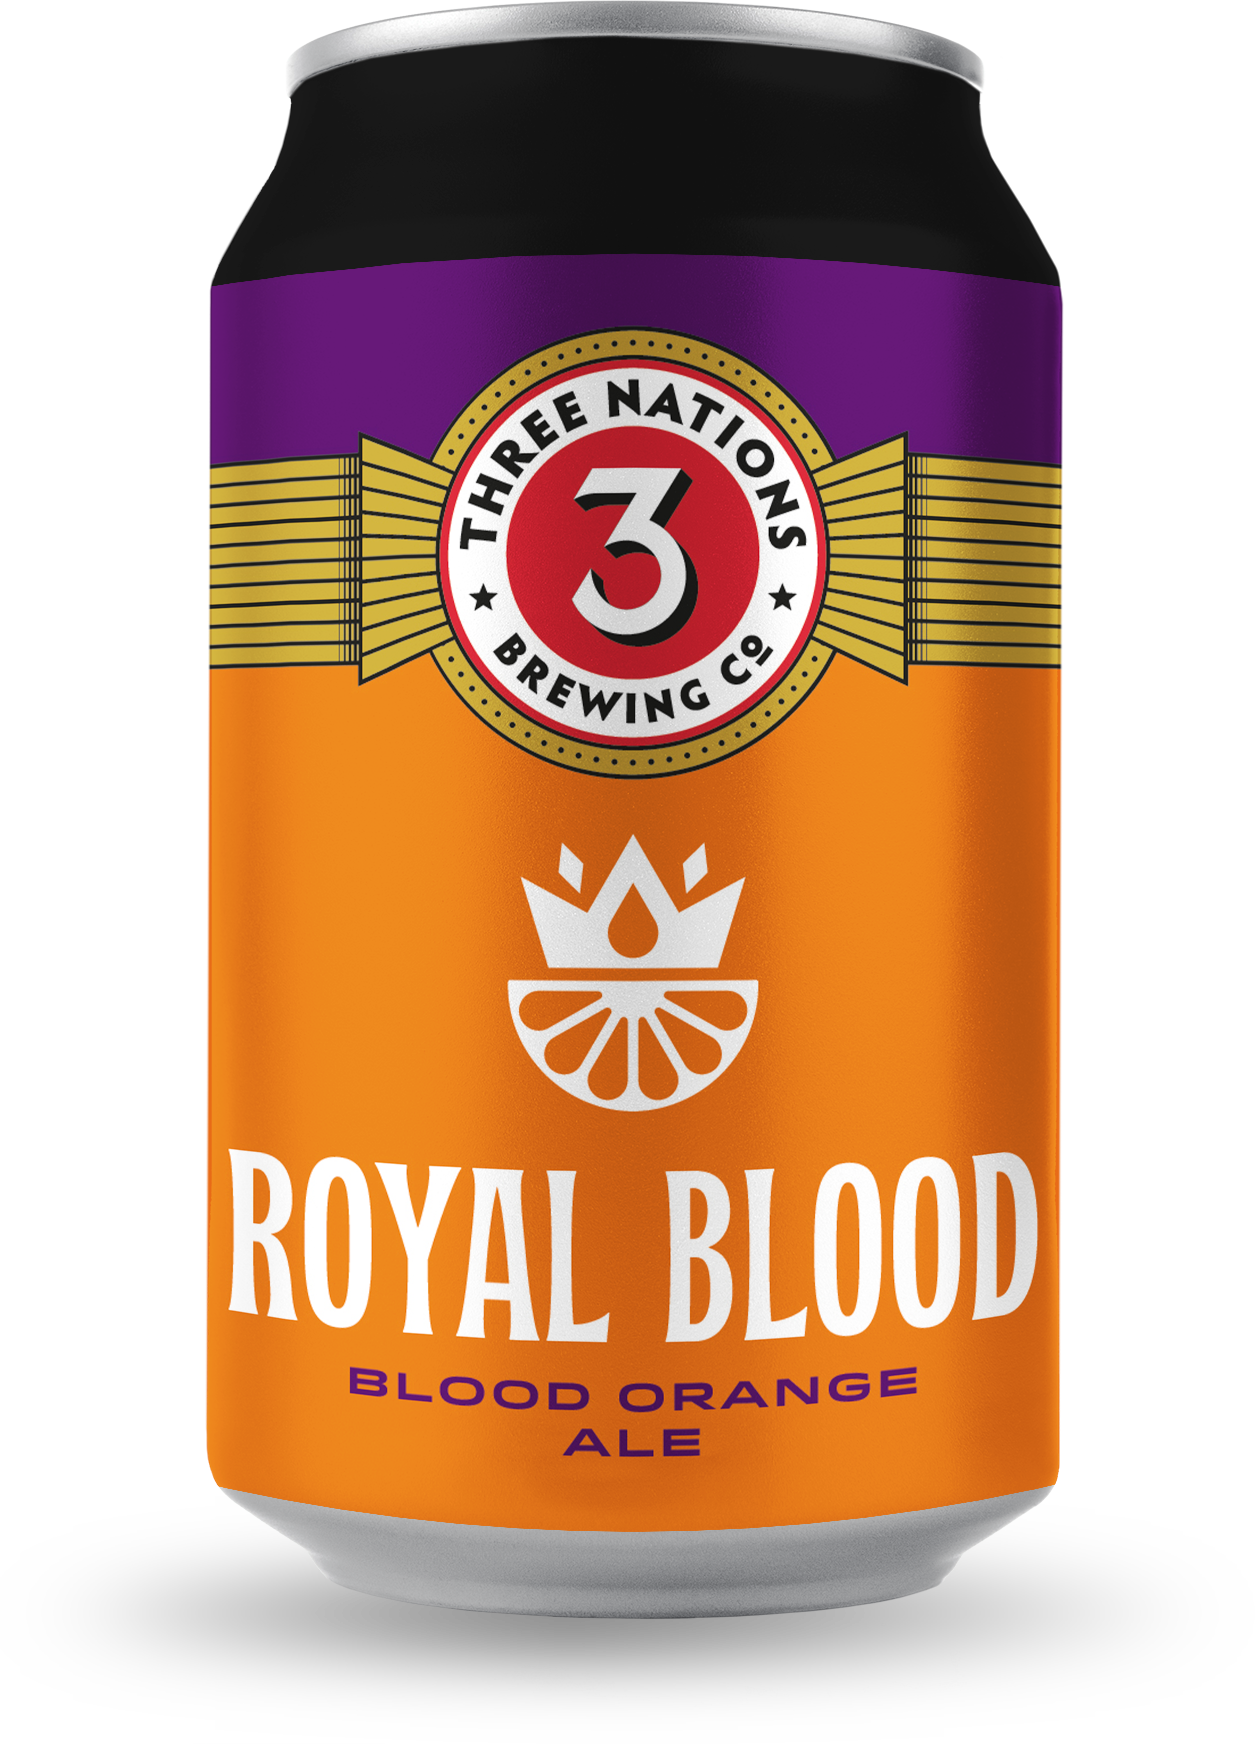 3 Nations Brewing's Royal Blood can design